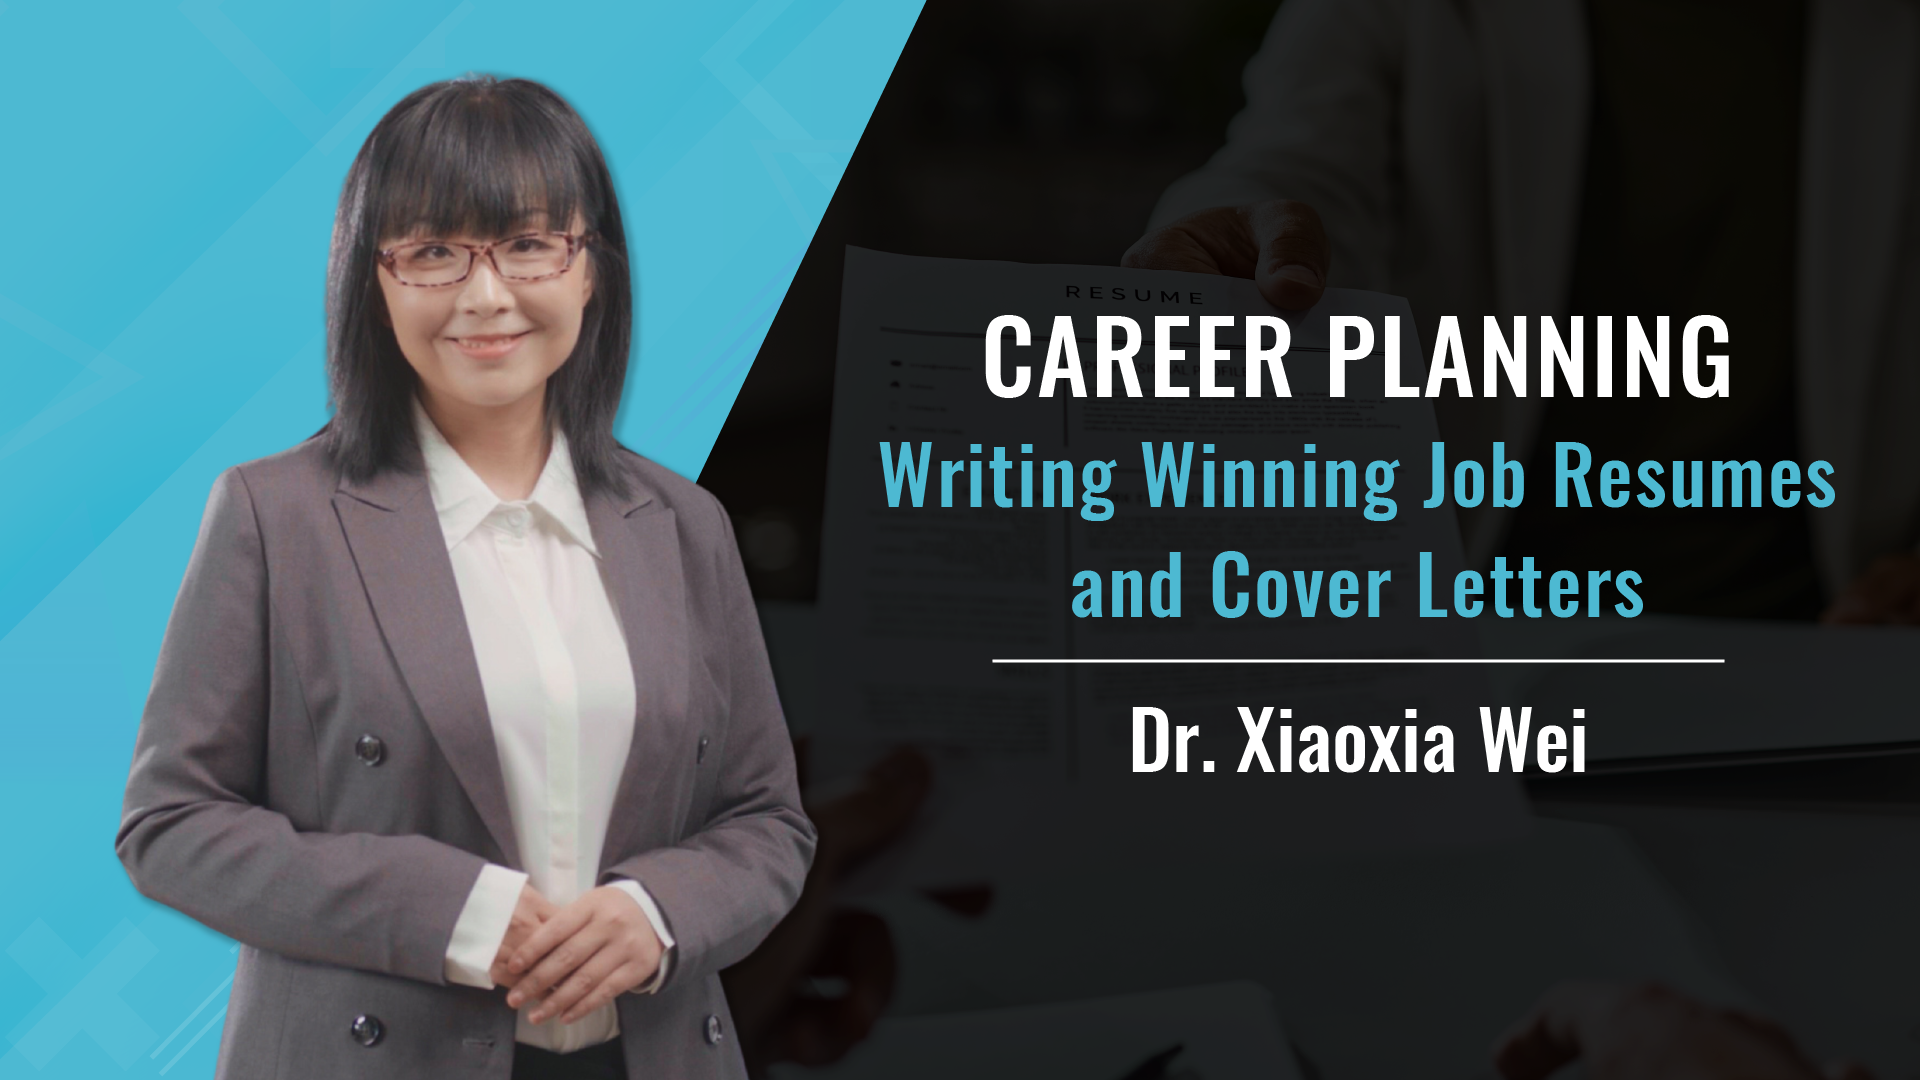 CAREER PLANNING—Writing Winning Job Resumes and Cover Letters 022